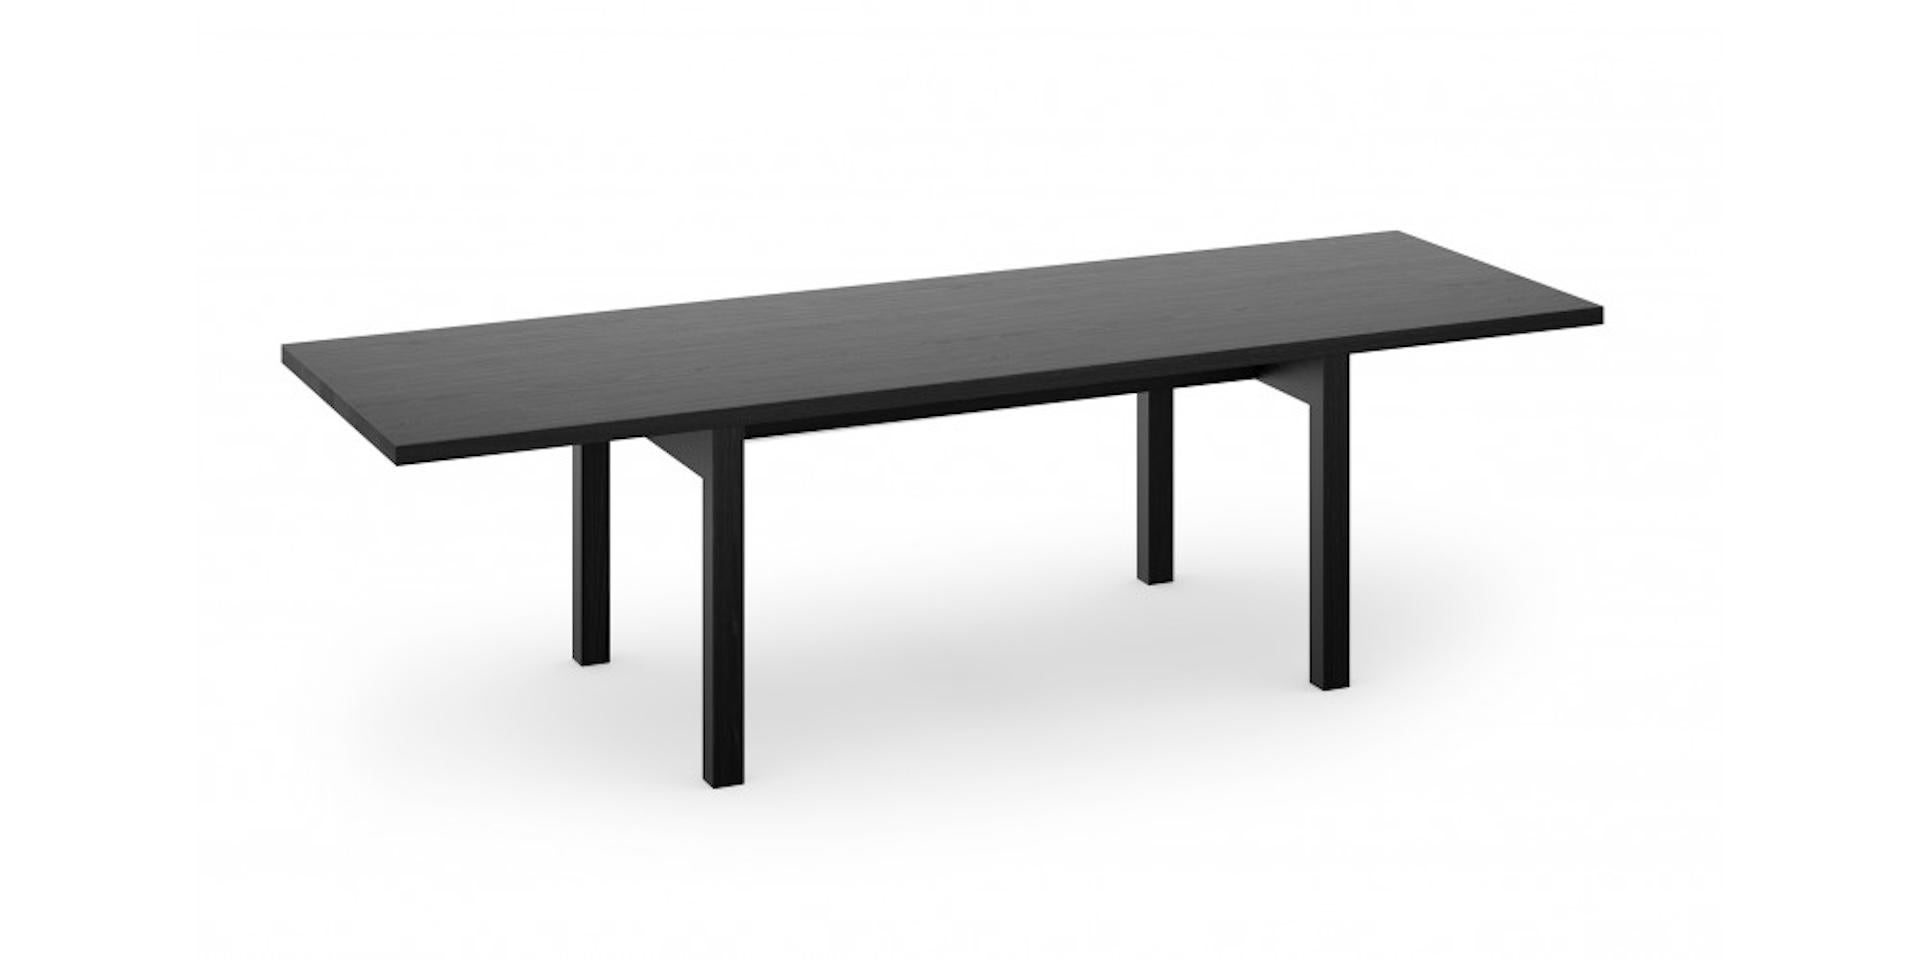 Table, European oak stained, lacquered Colour: jet black.

In 2012 David Chipperfield Architects were commissioned to restore the Neue Nationalgalerie in Berlin, an icon of twentieth-century architecture by Ludwig Mies van der Rohe, built from 1963